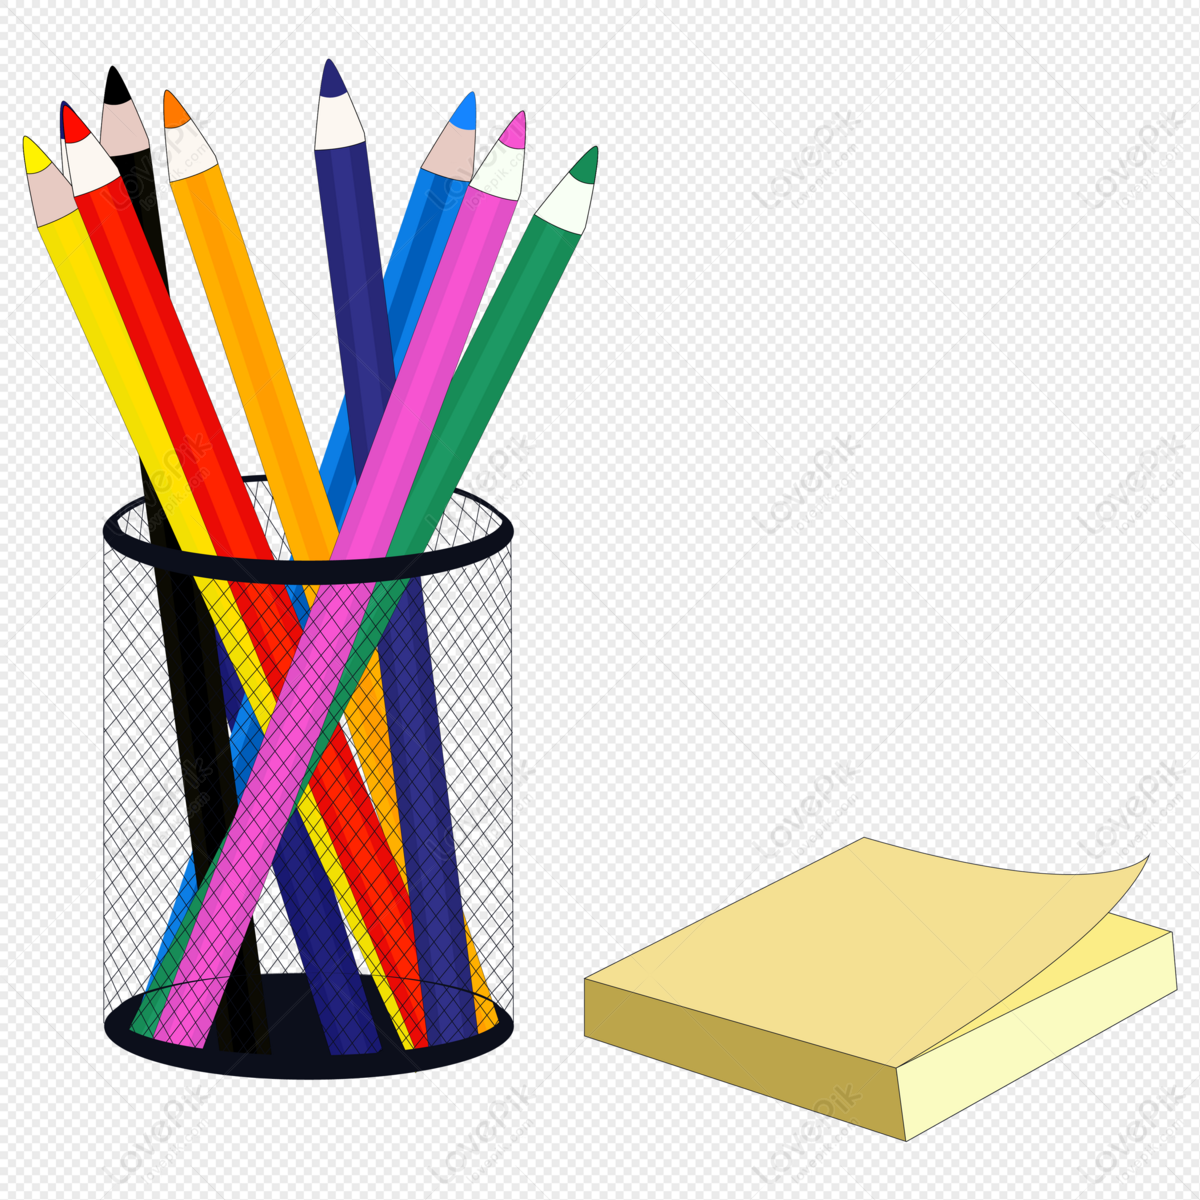 Drawing Stuff PNG Transparent Images Free Download